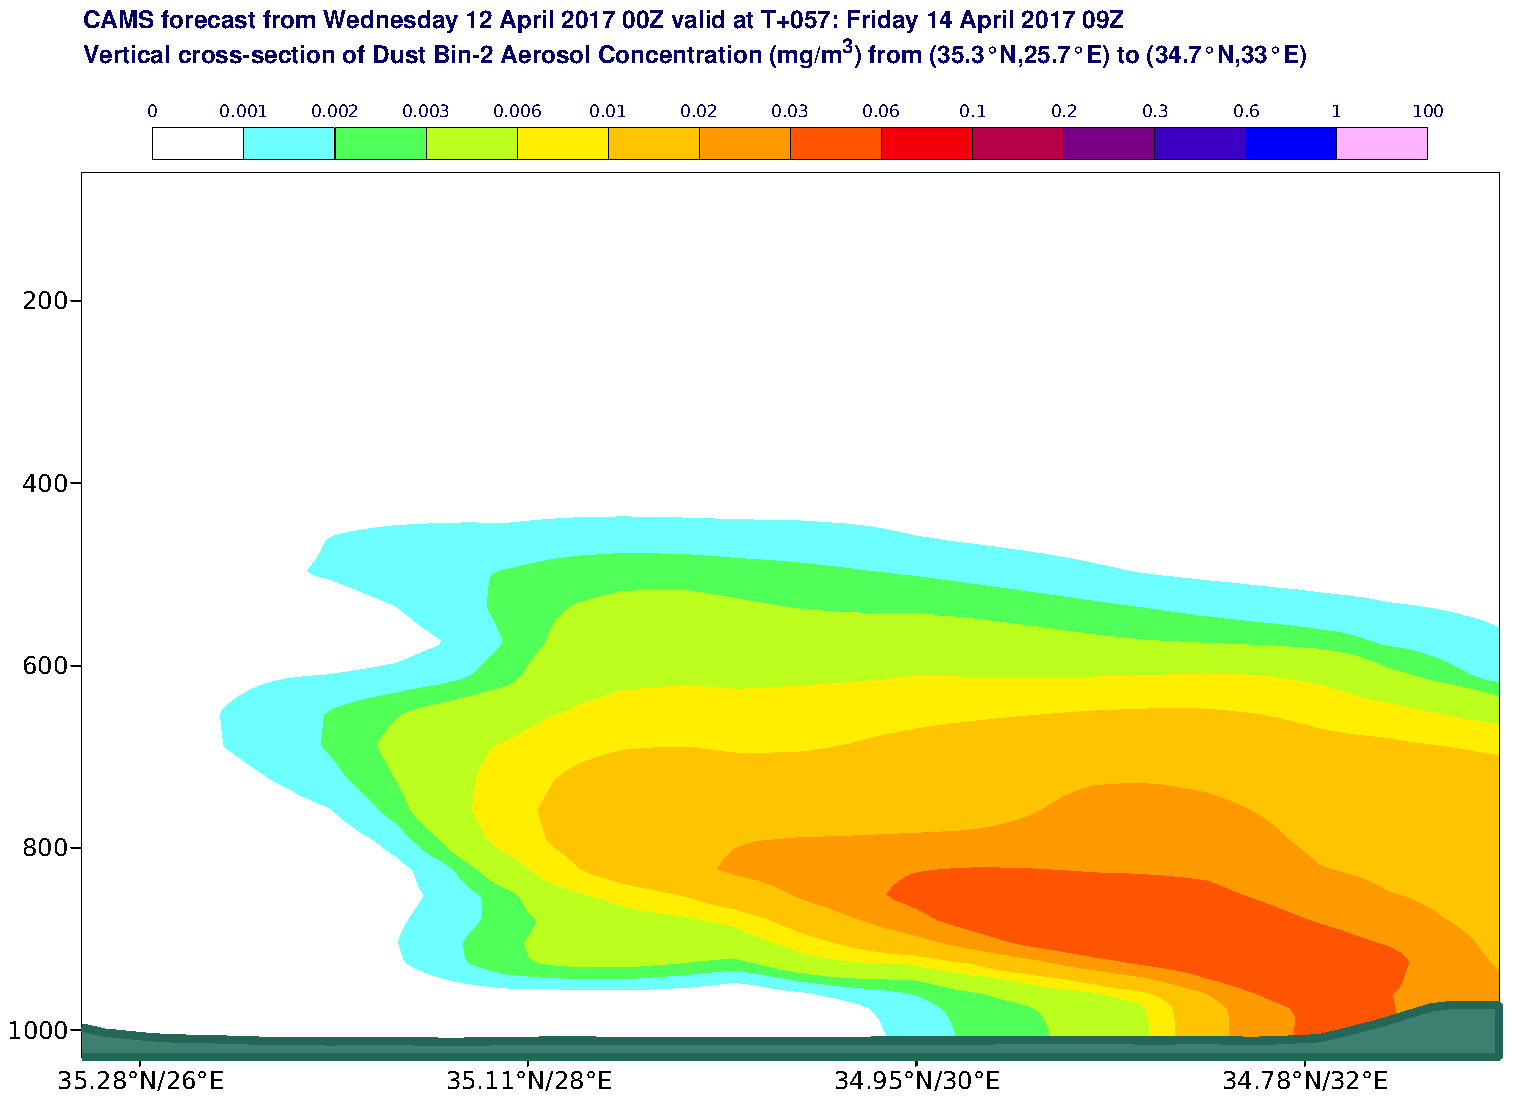 Vertical cross-section of Dust Bin-2 Aerosol Concentration (mg/m3) valid at T57 - 2017-04-14 09:00